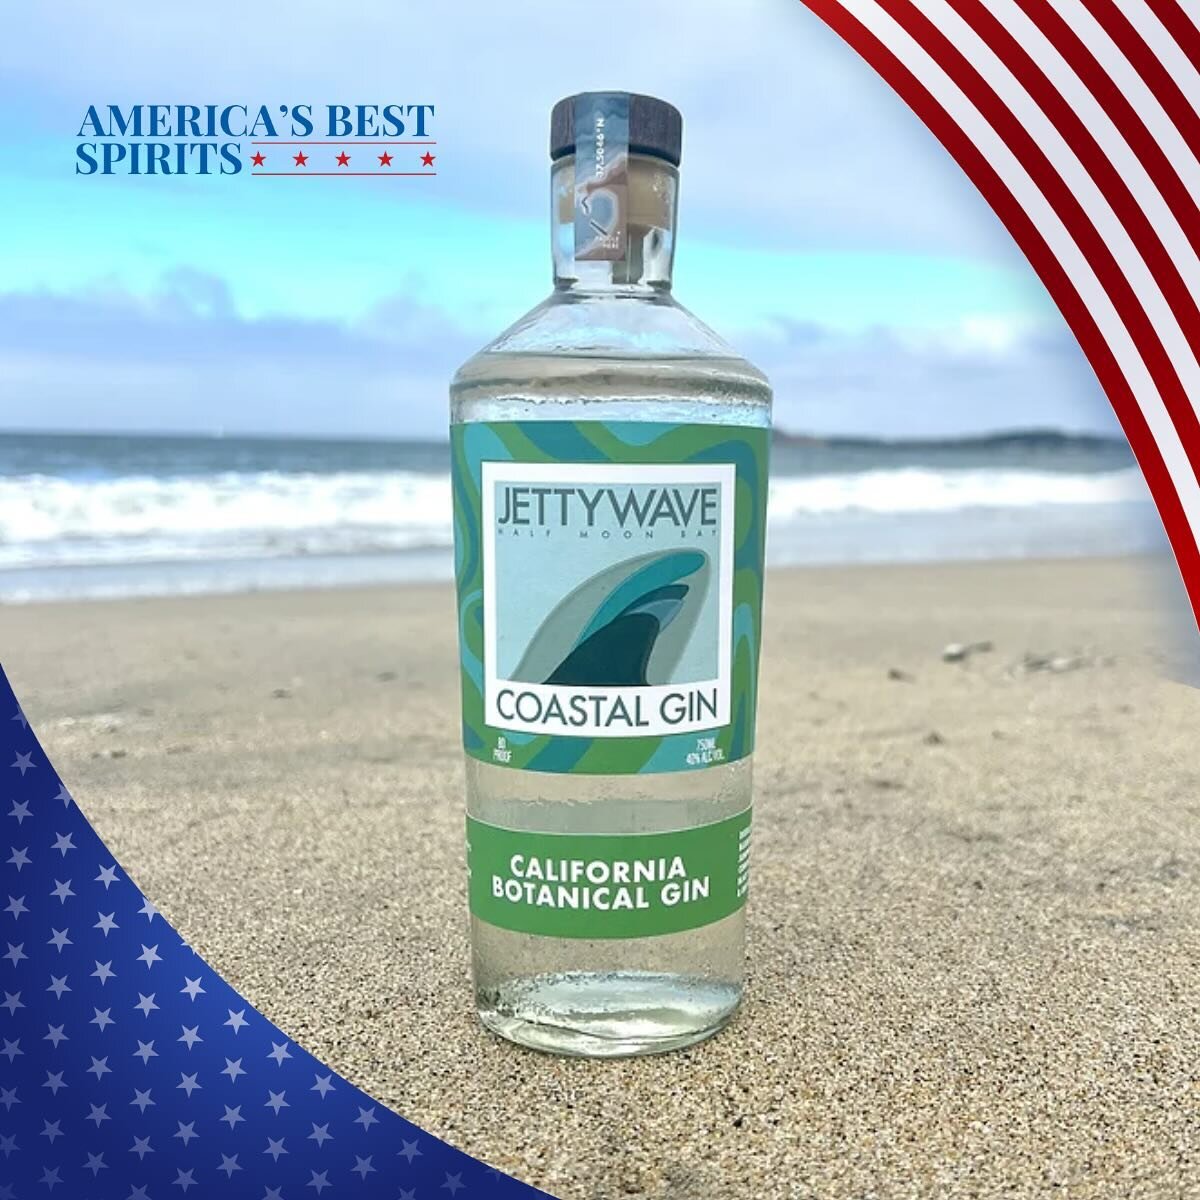 🌊✨ Celebrating Jettywave Distillery&rsquo;s Entry in America&rsquo;s Best Spirits Awards! 🥂🏆

We&rsquo;re thrilled to shine the spotlight on Jettywave Distillery, joining the ranks of America&rsquo;s finest at The Triple Crown of Spirit Competitio